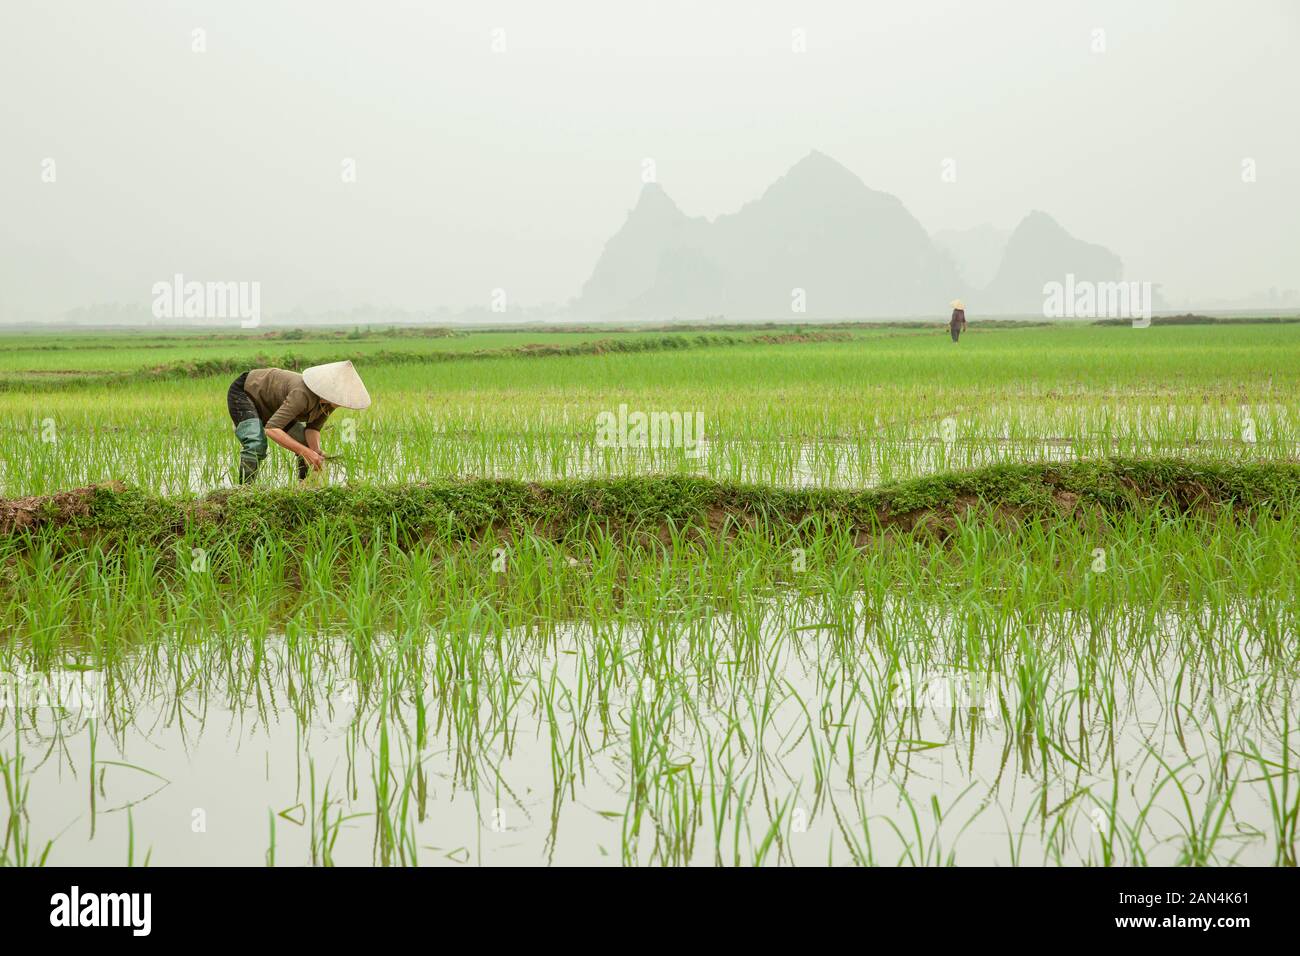 Farmer planting rice with vast Paddy fields view, Vietnamese worker wearing Asian conical hat in rural landscape during a foggy day Ninh Binh, Vietnam Stock Photo